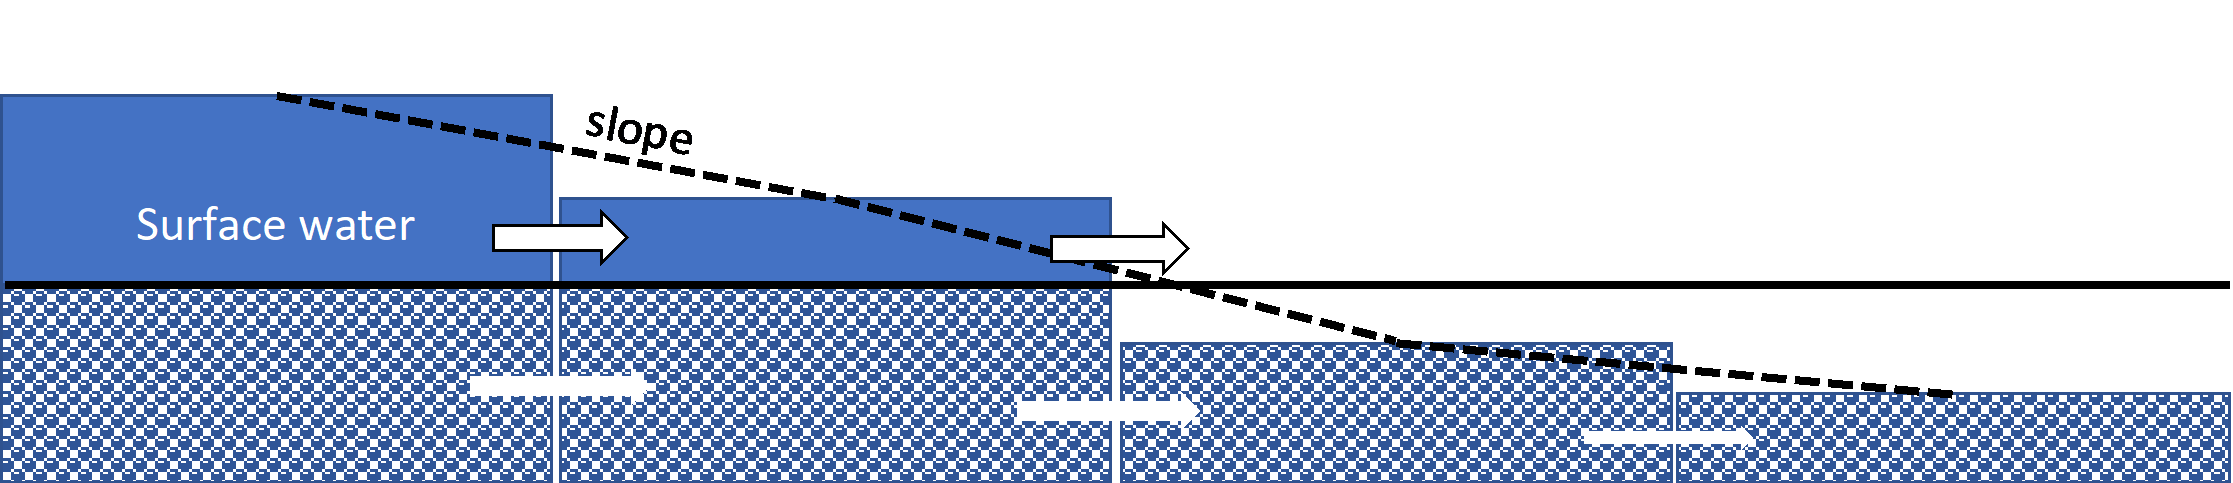 Applications of the interflow layer